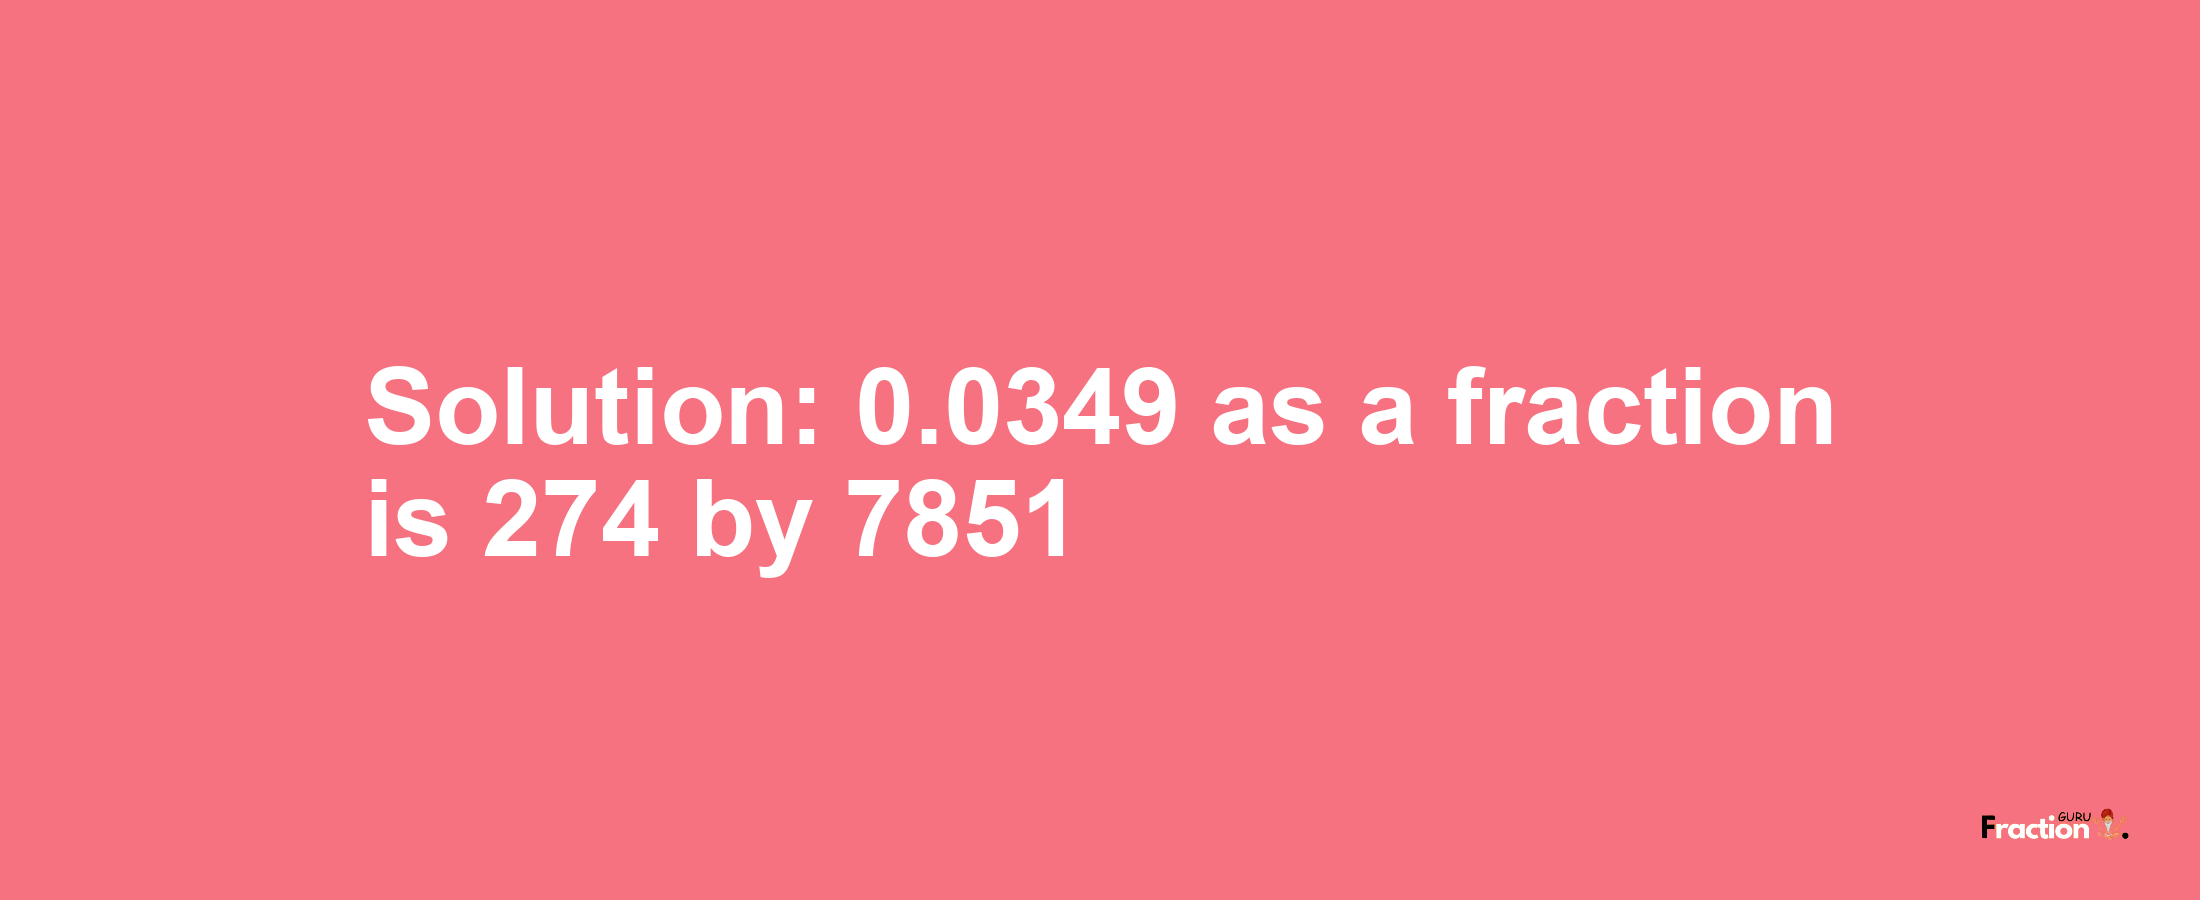 Solution:0.0349 as a fraction is 274/7851